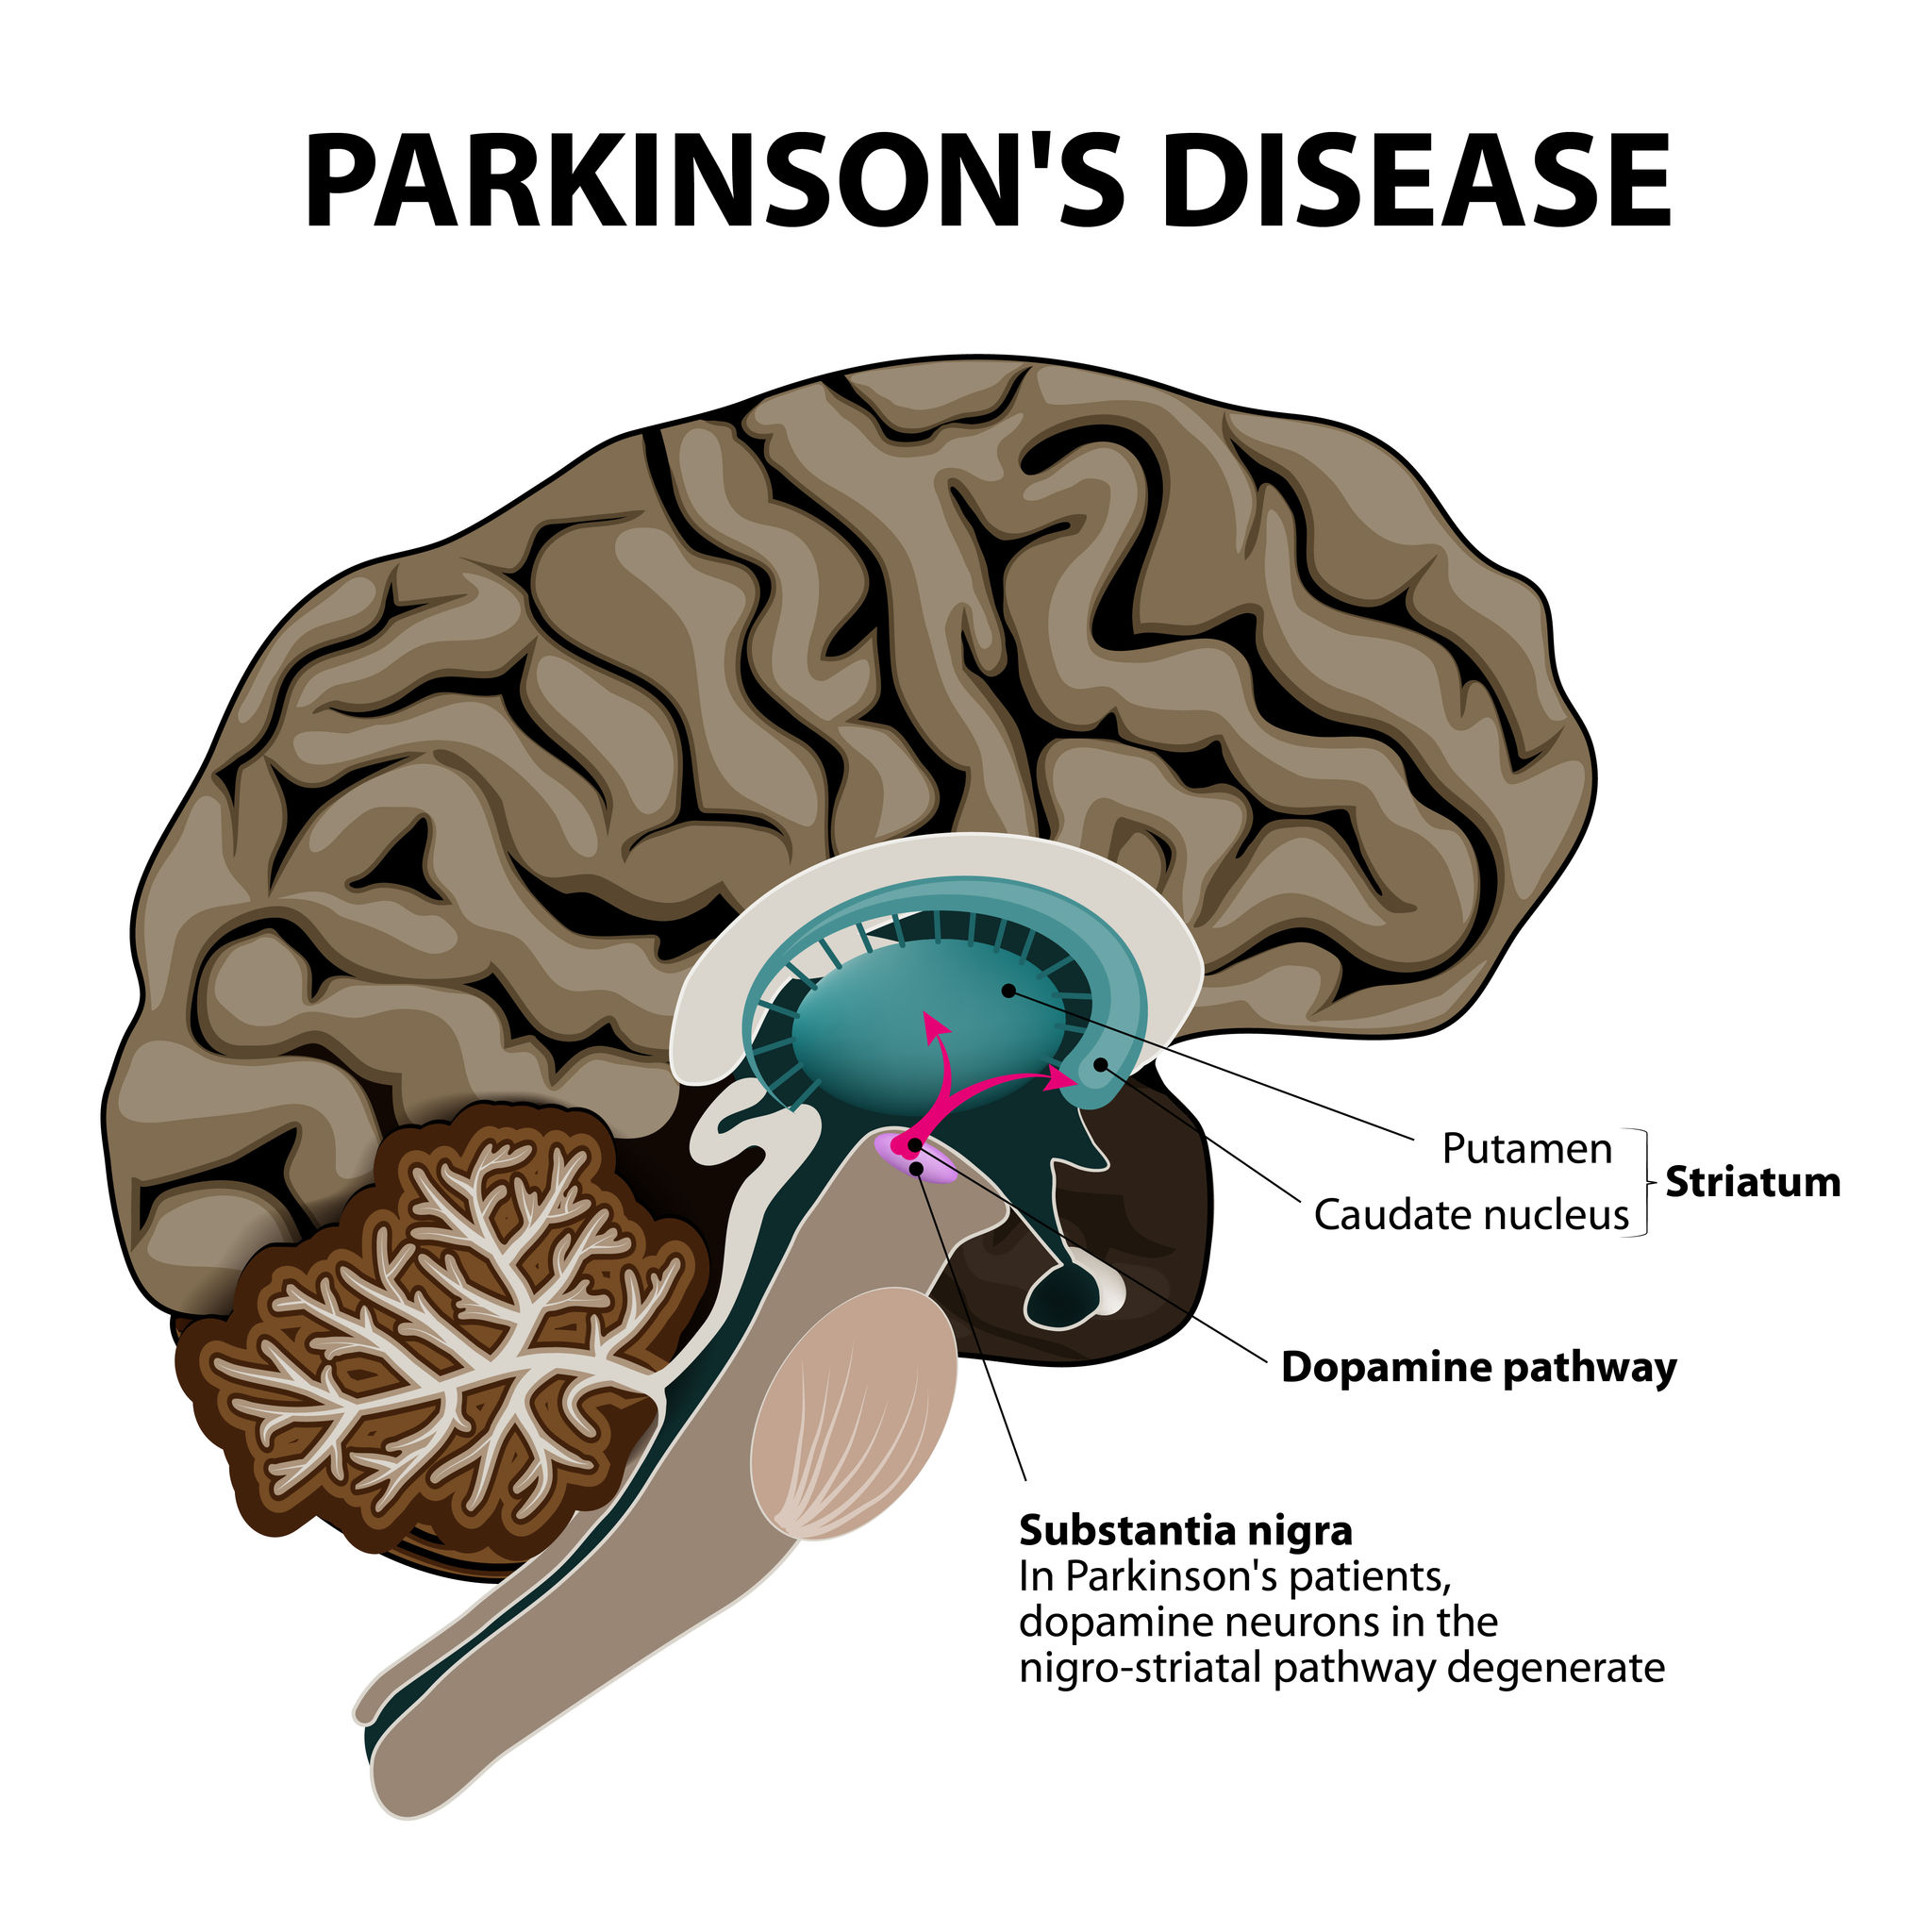 Image of a brain with parkinsons disease